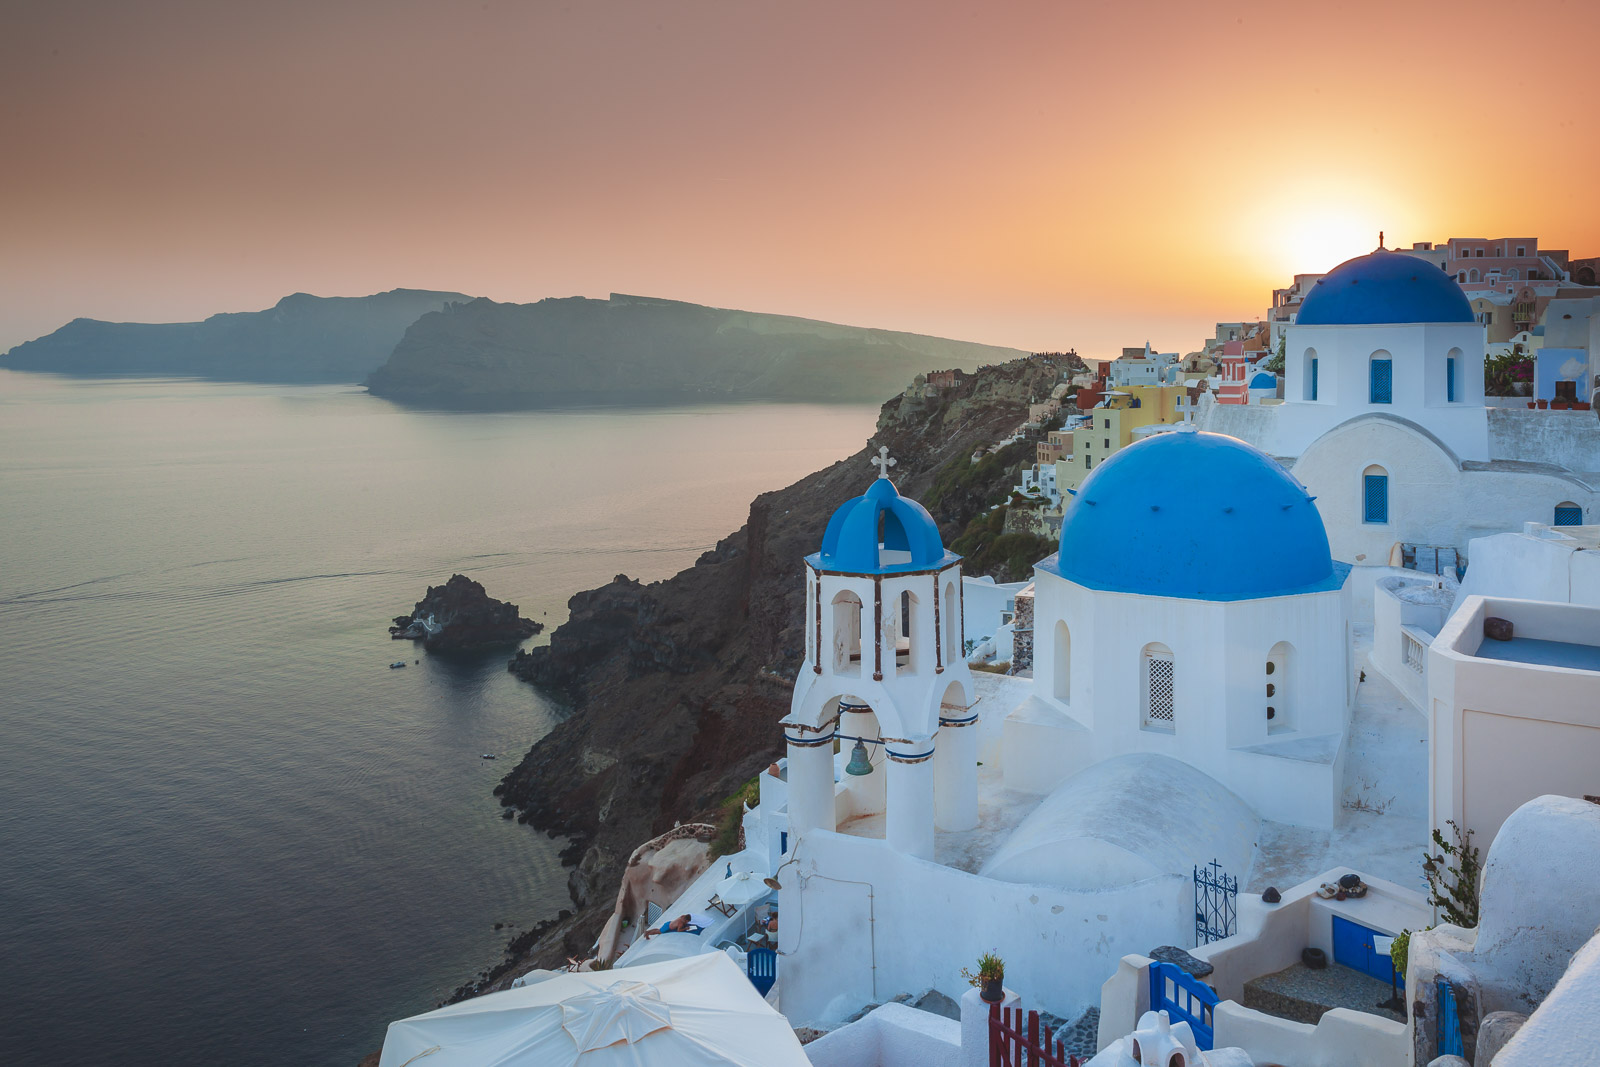 25 Best Things to do in Santorini, Greece (2022) - The Planet D